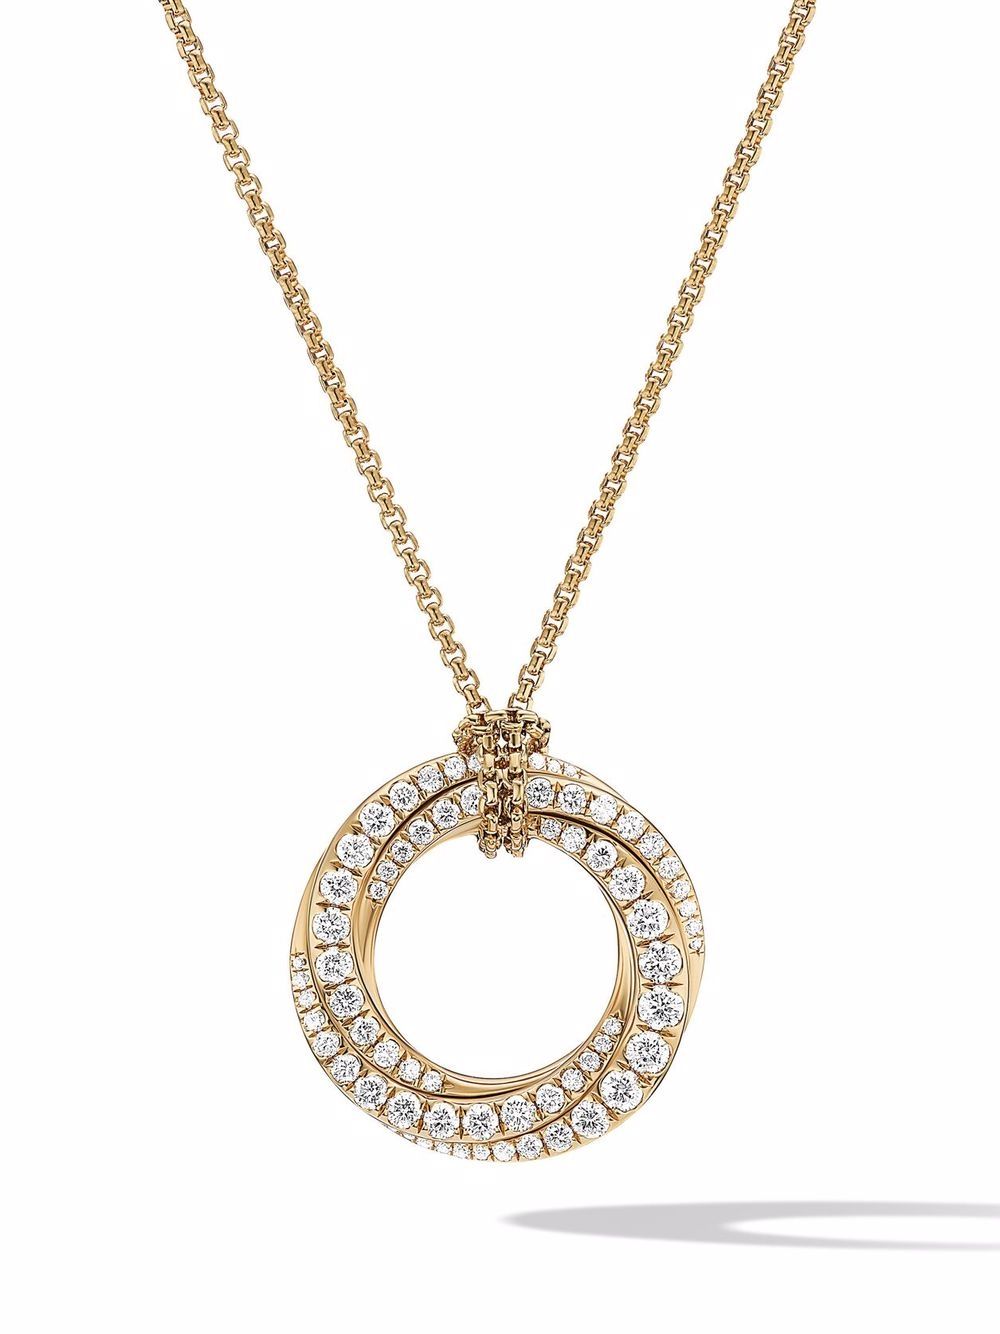 18kt yellow gold Crossover diamond necklace